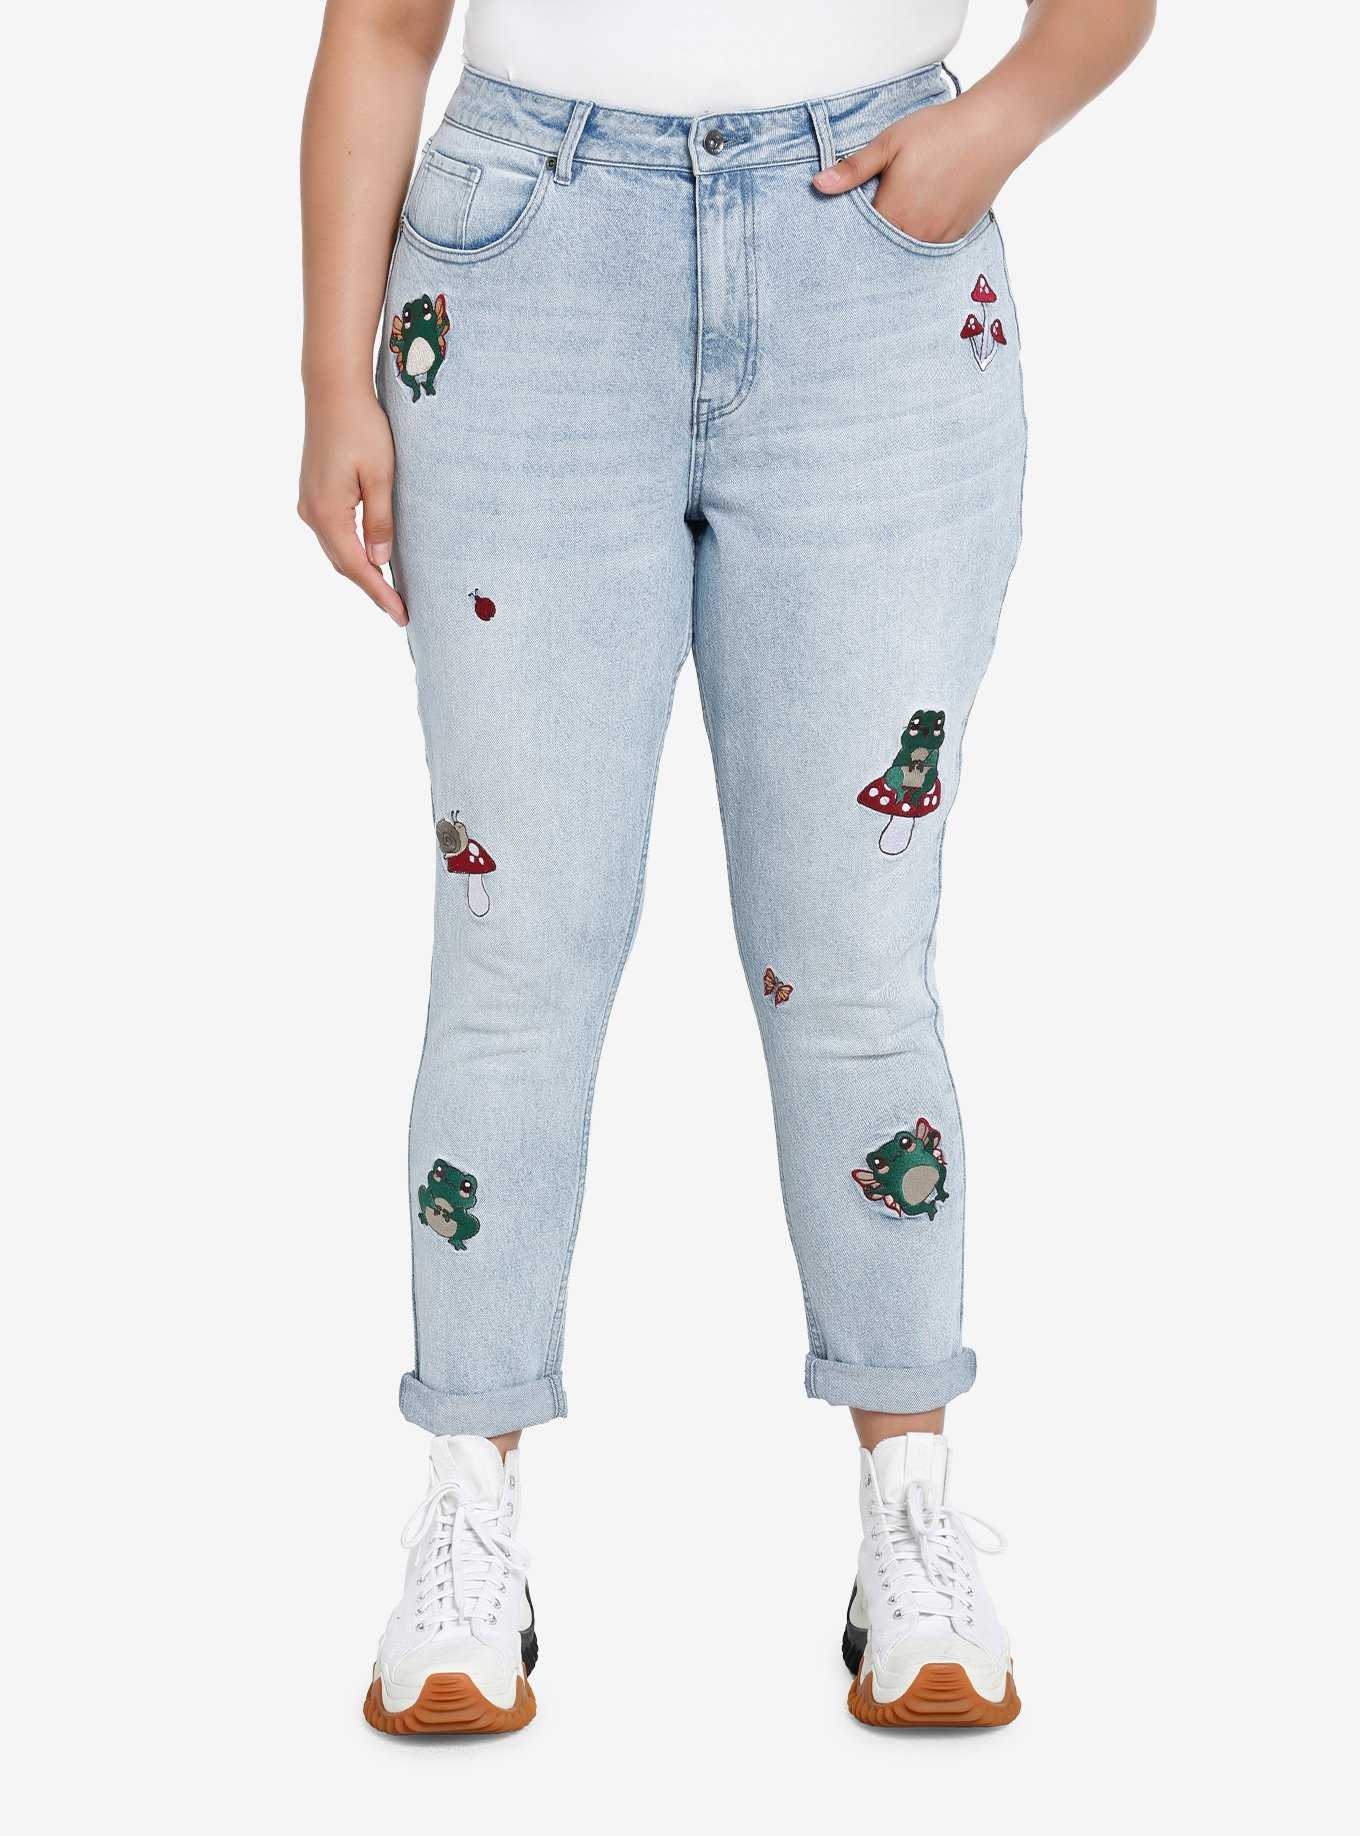 HT Denim Frogs & Mushrooms Embroidered Mom Jeans Plus Size, , hi-res